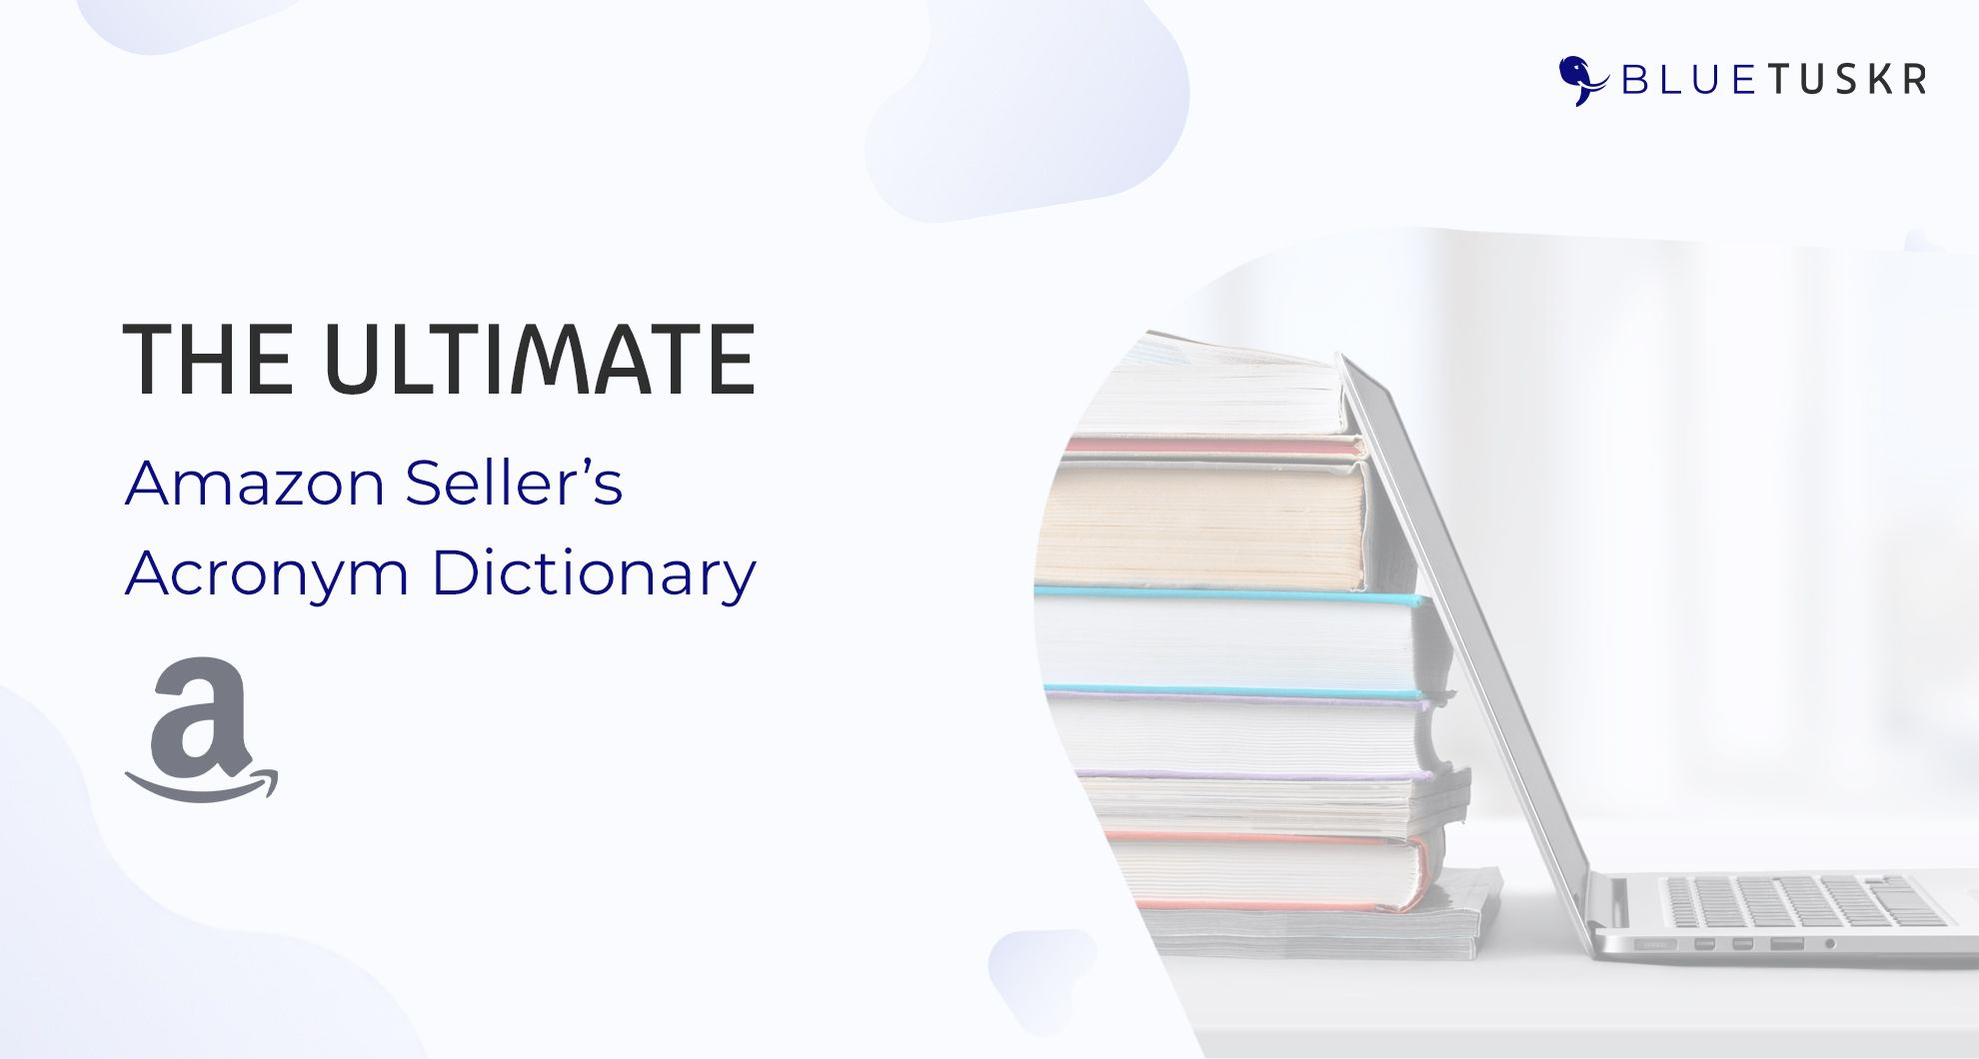 The Ultimate Amazon Seller’s Acronym Dictionary